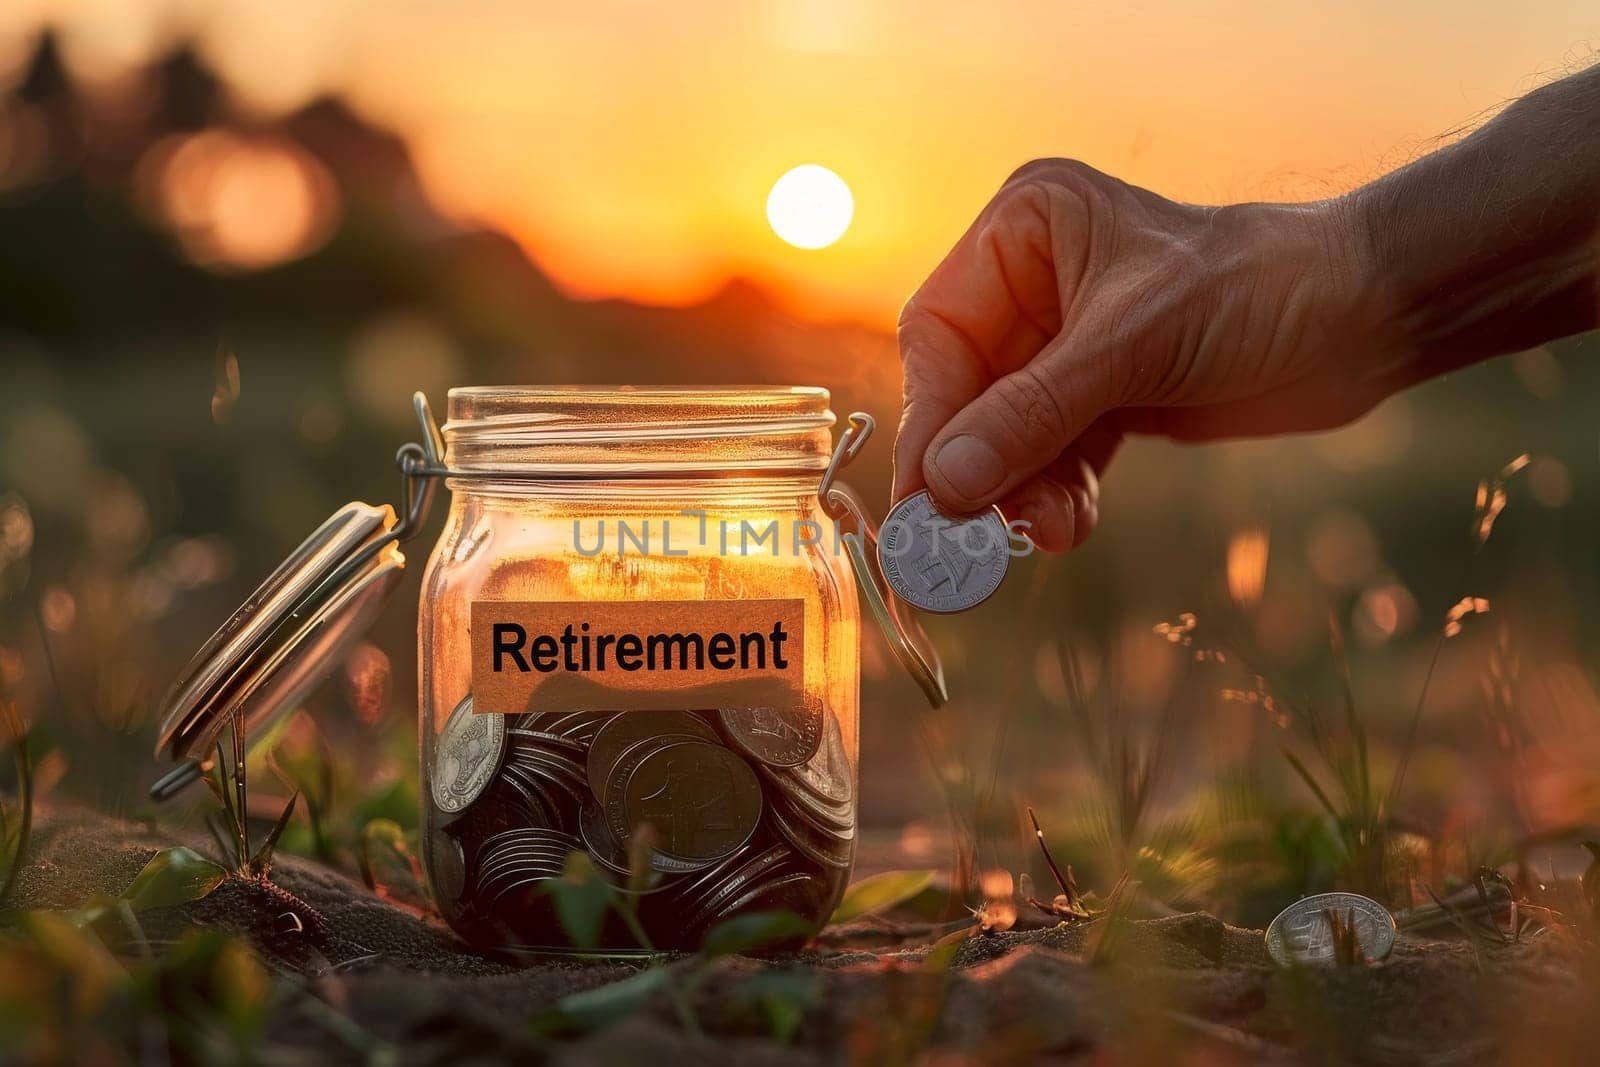 A jar full of coins with the word retirement written on it